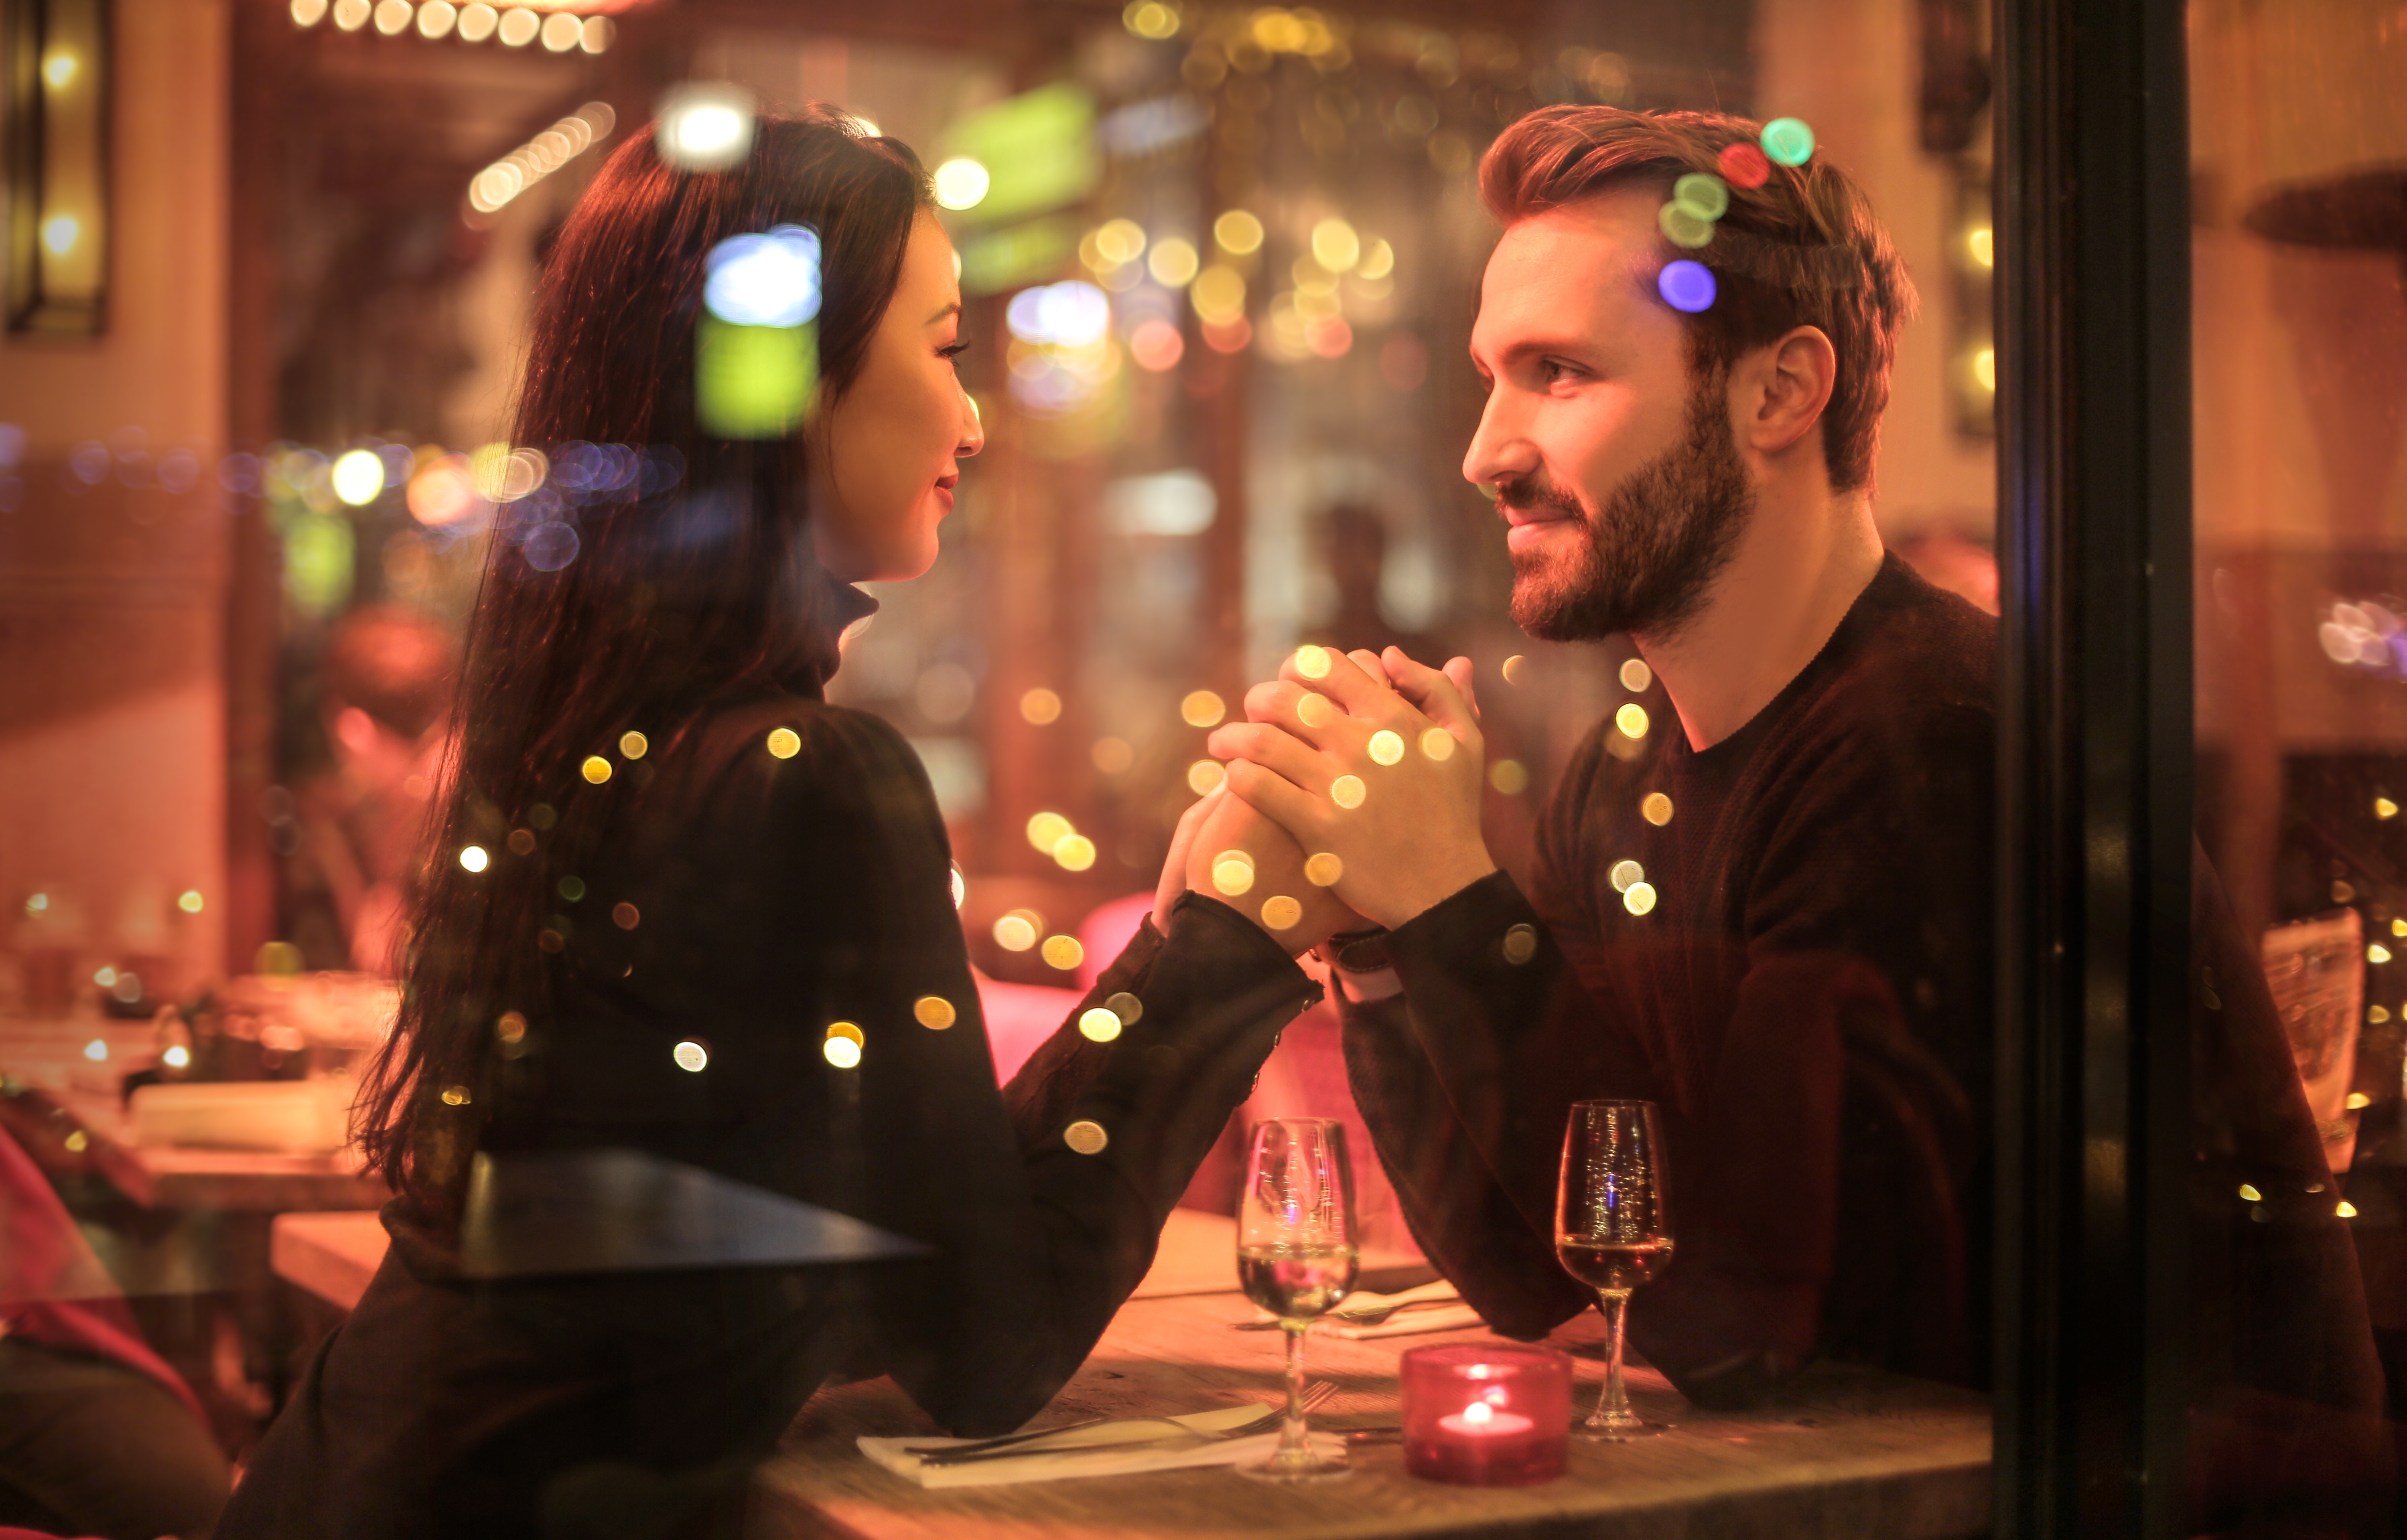 Eight New Year’s Resolutions for Your Relationship